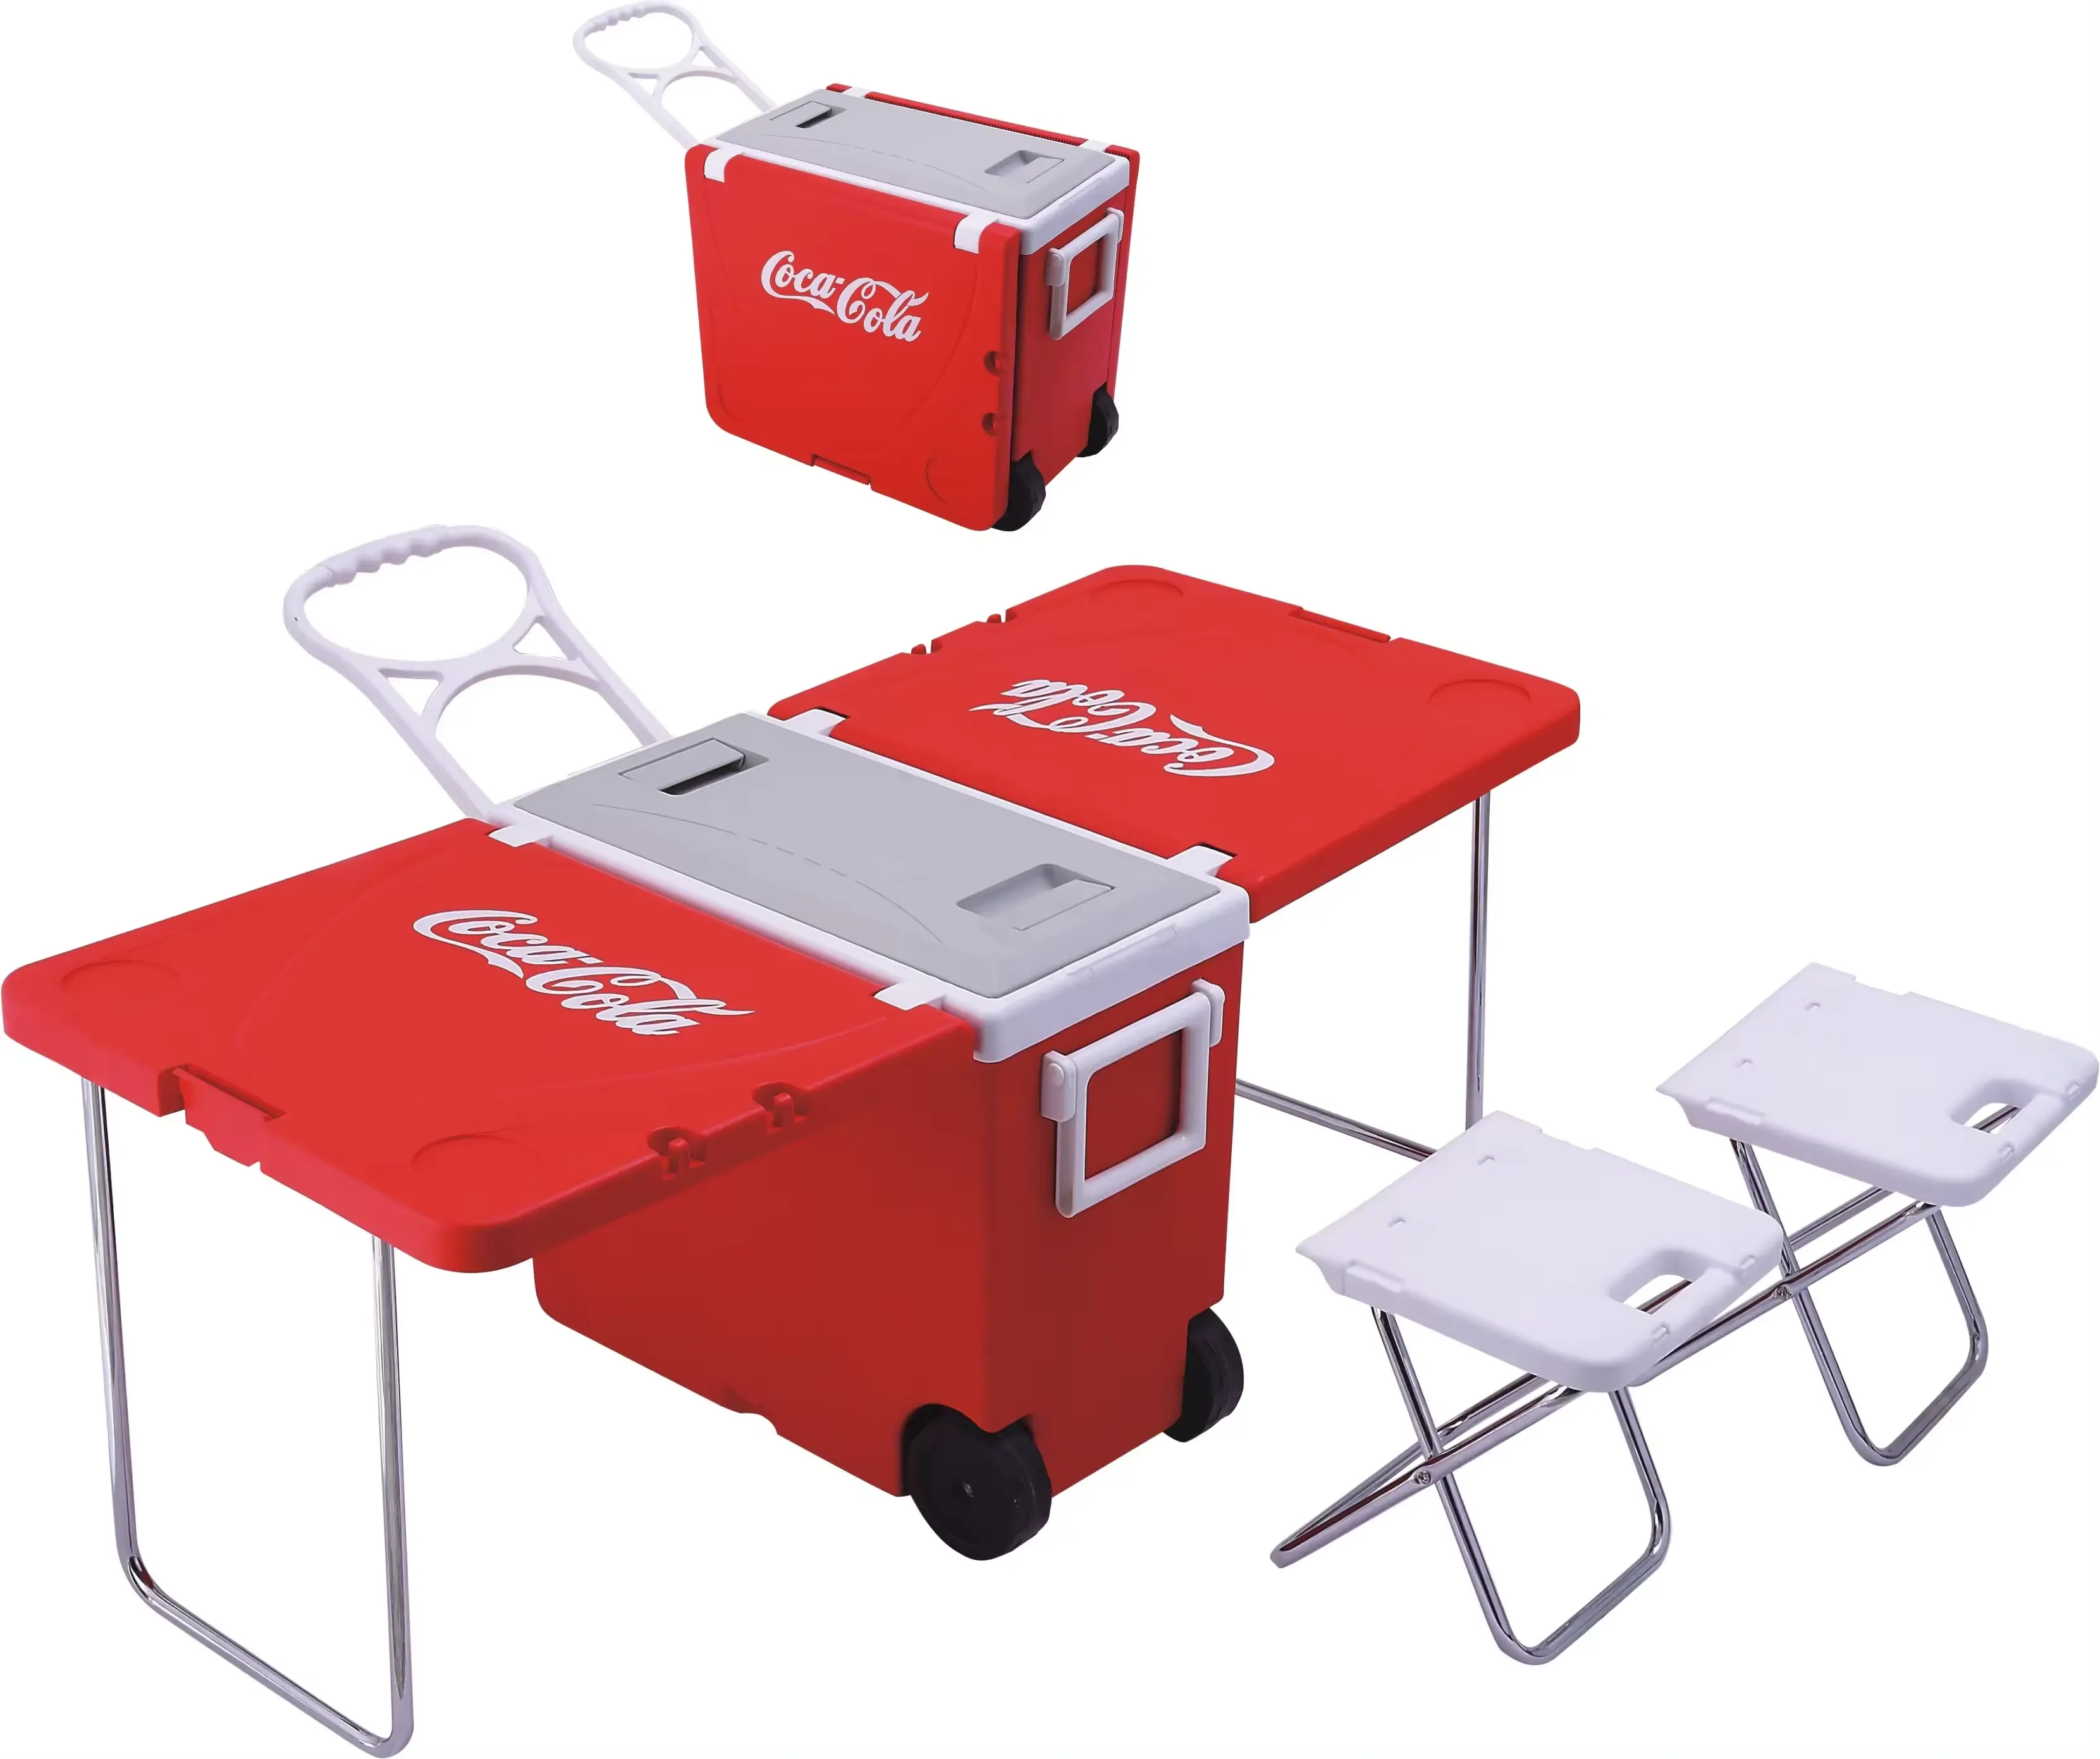 Customized high-capacity multifunctional picnic insulated refrigerated box with handles wheels and tables and chairs